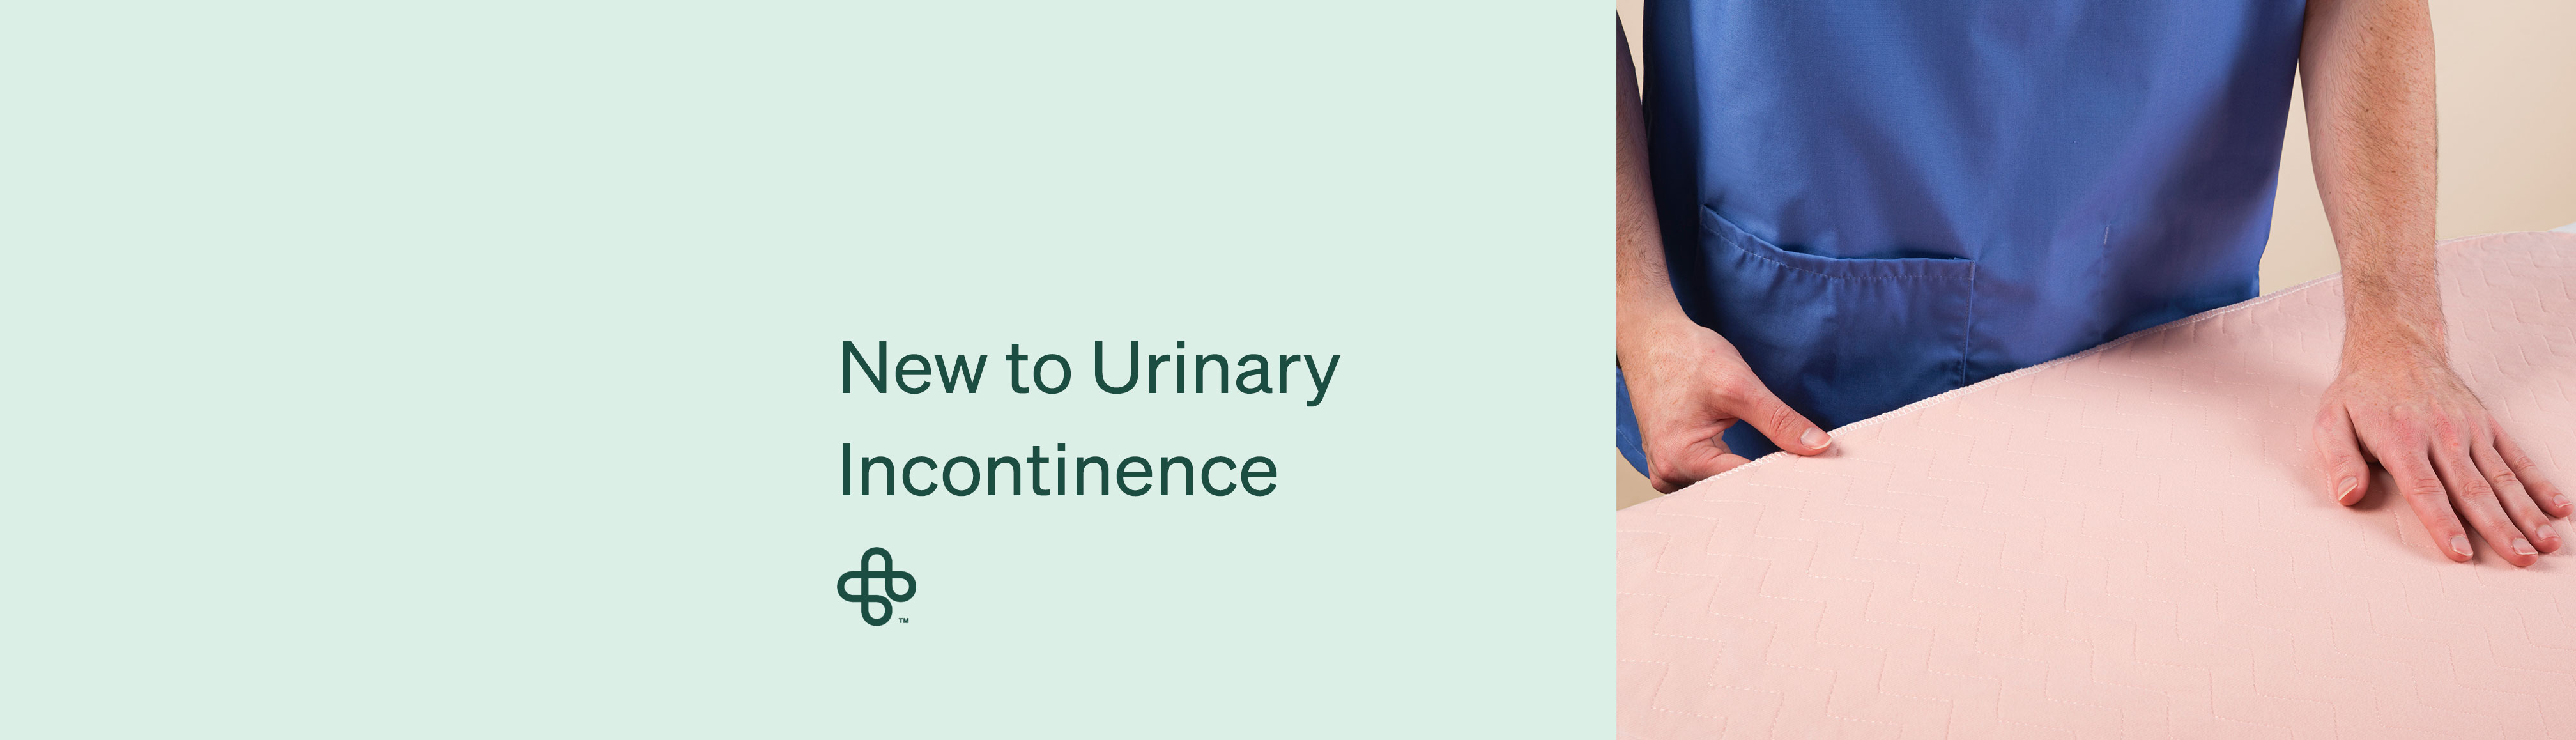 New to Urinary Incontinence